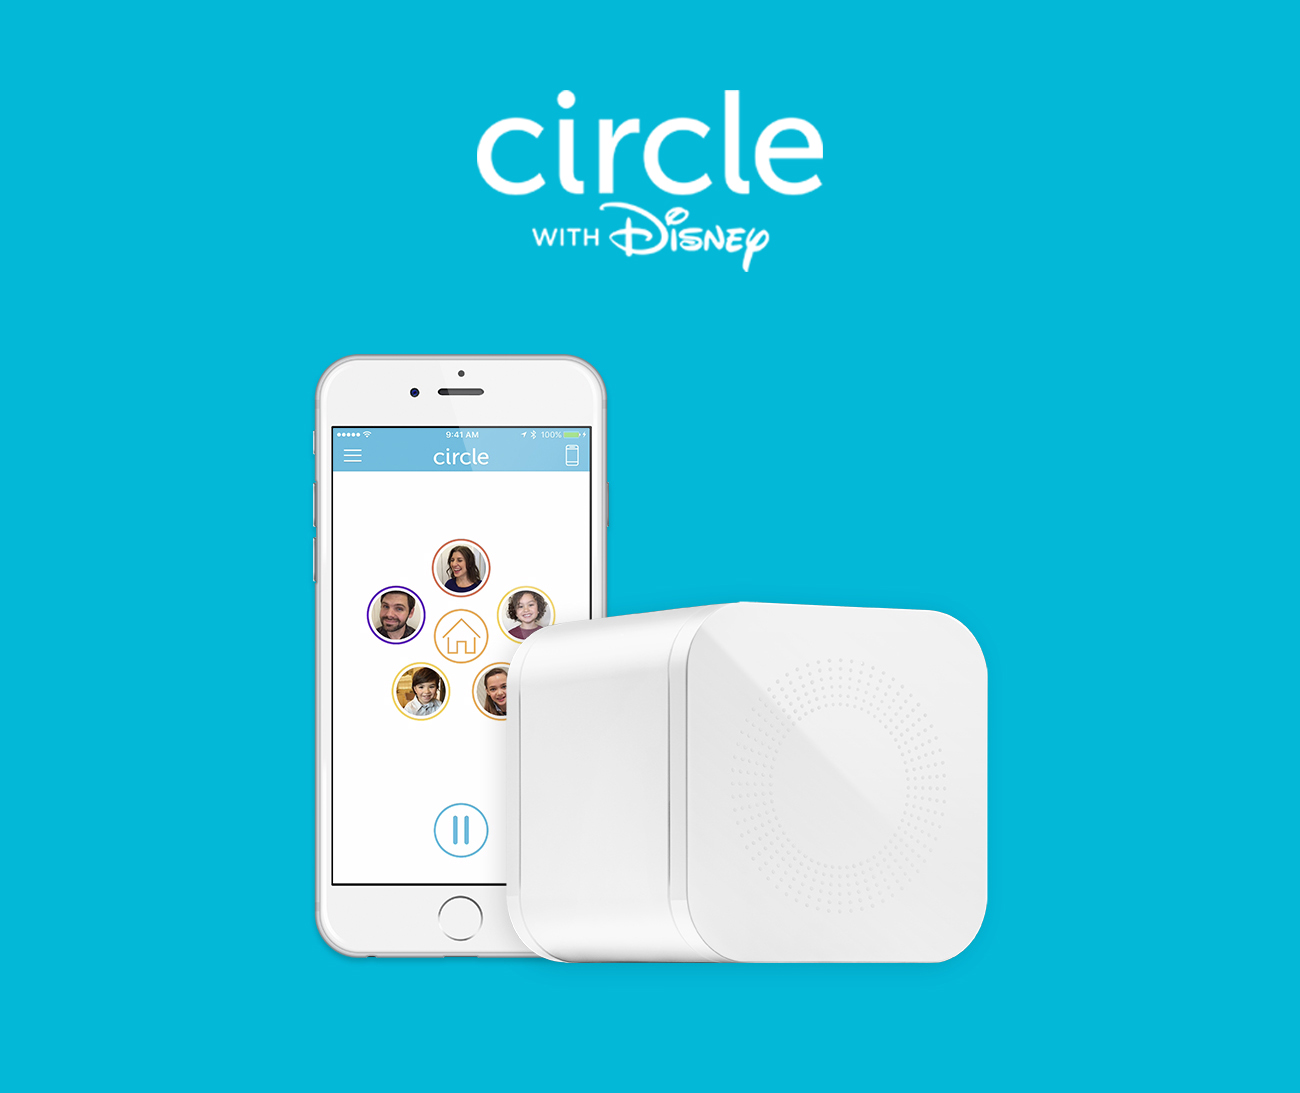 New Circle With Disney Device Helps Parents Manage Kids’ Screen Time